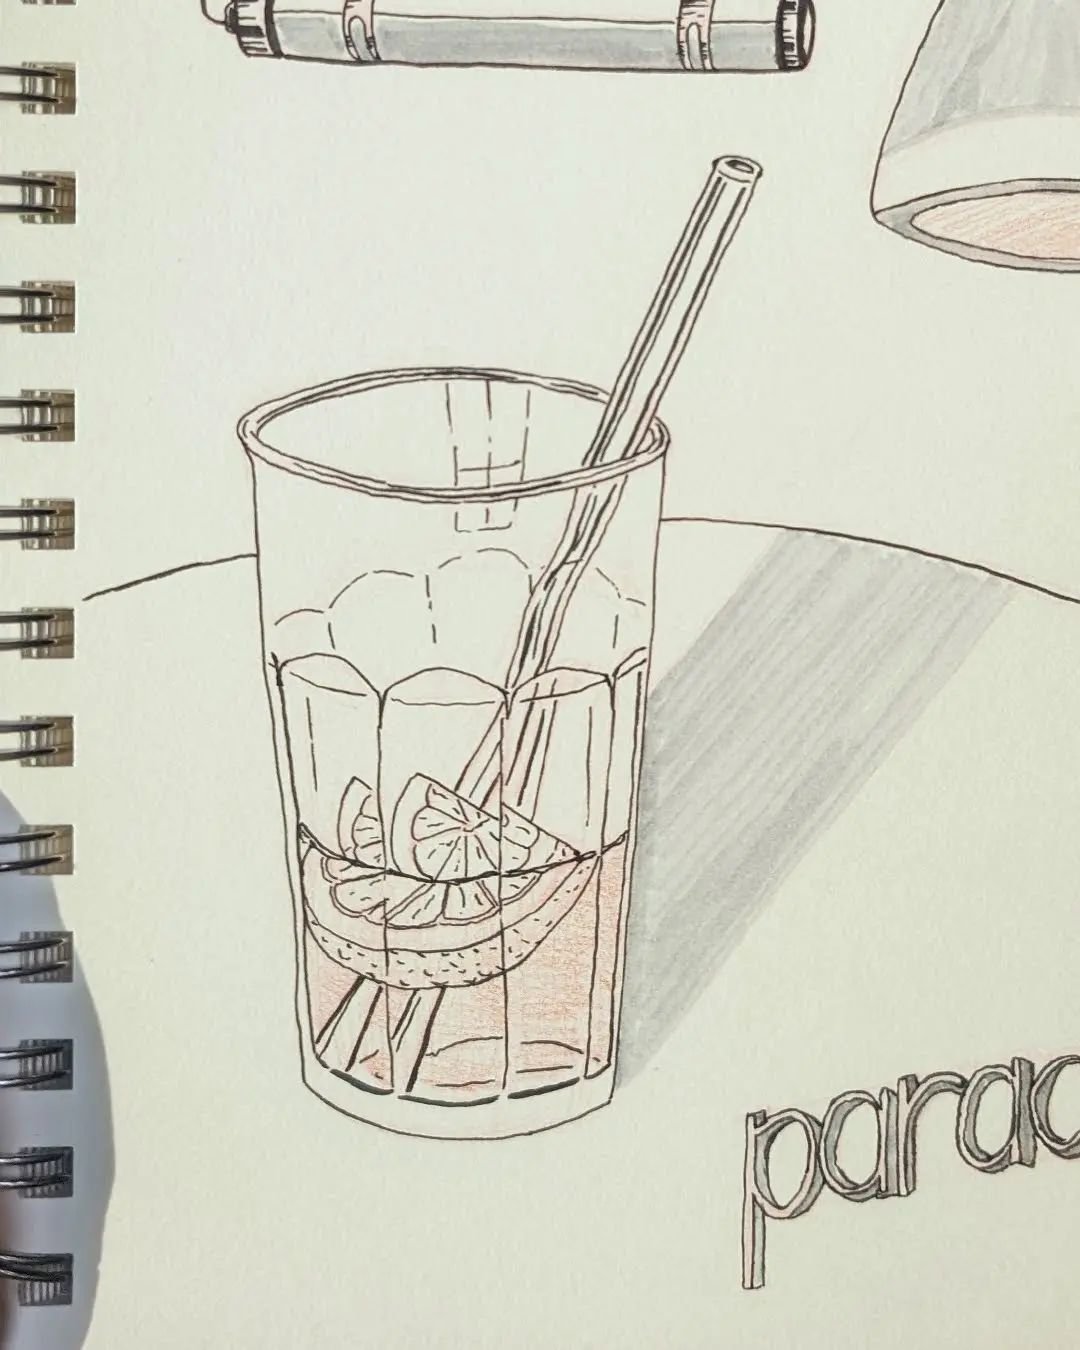 First page in a new sketchbook at a chill cafe! ☕🐱

I've been quiet about posting art online for awhile- but have been journaling and reading the Artist's Way. I've added in daily drawings &amp; scribbles in addition to a morning journal session, an